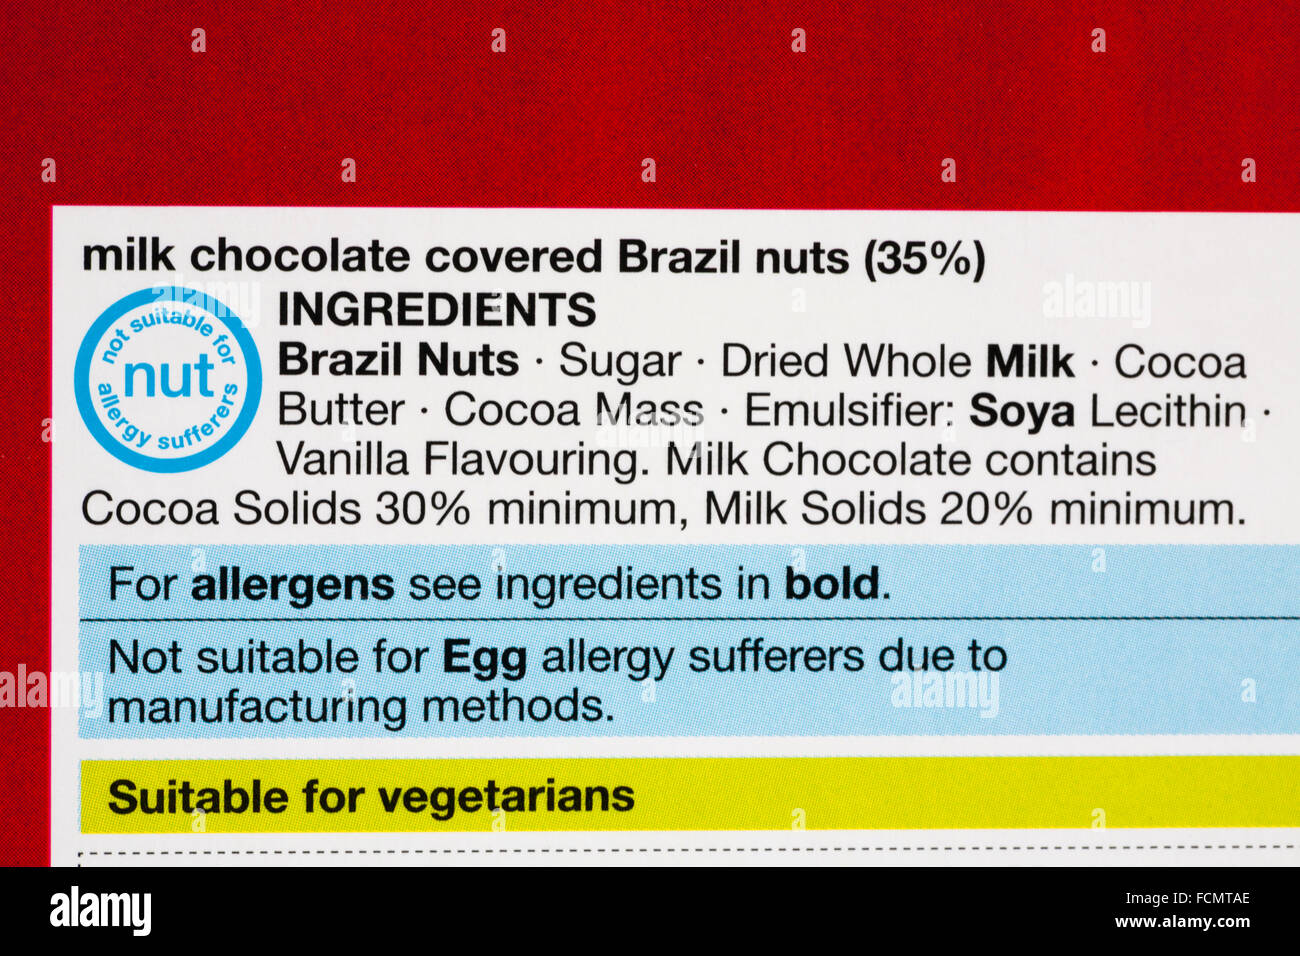 Ingredients and allergens information on box of milk chocolate covered Brazil nuts Stock Photo